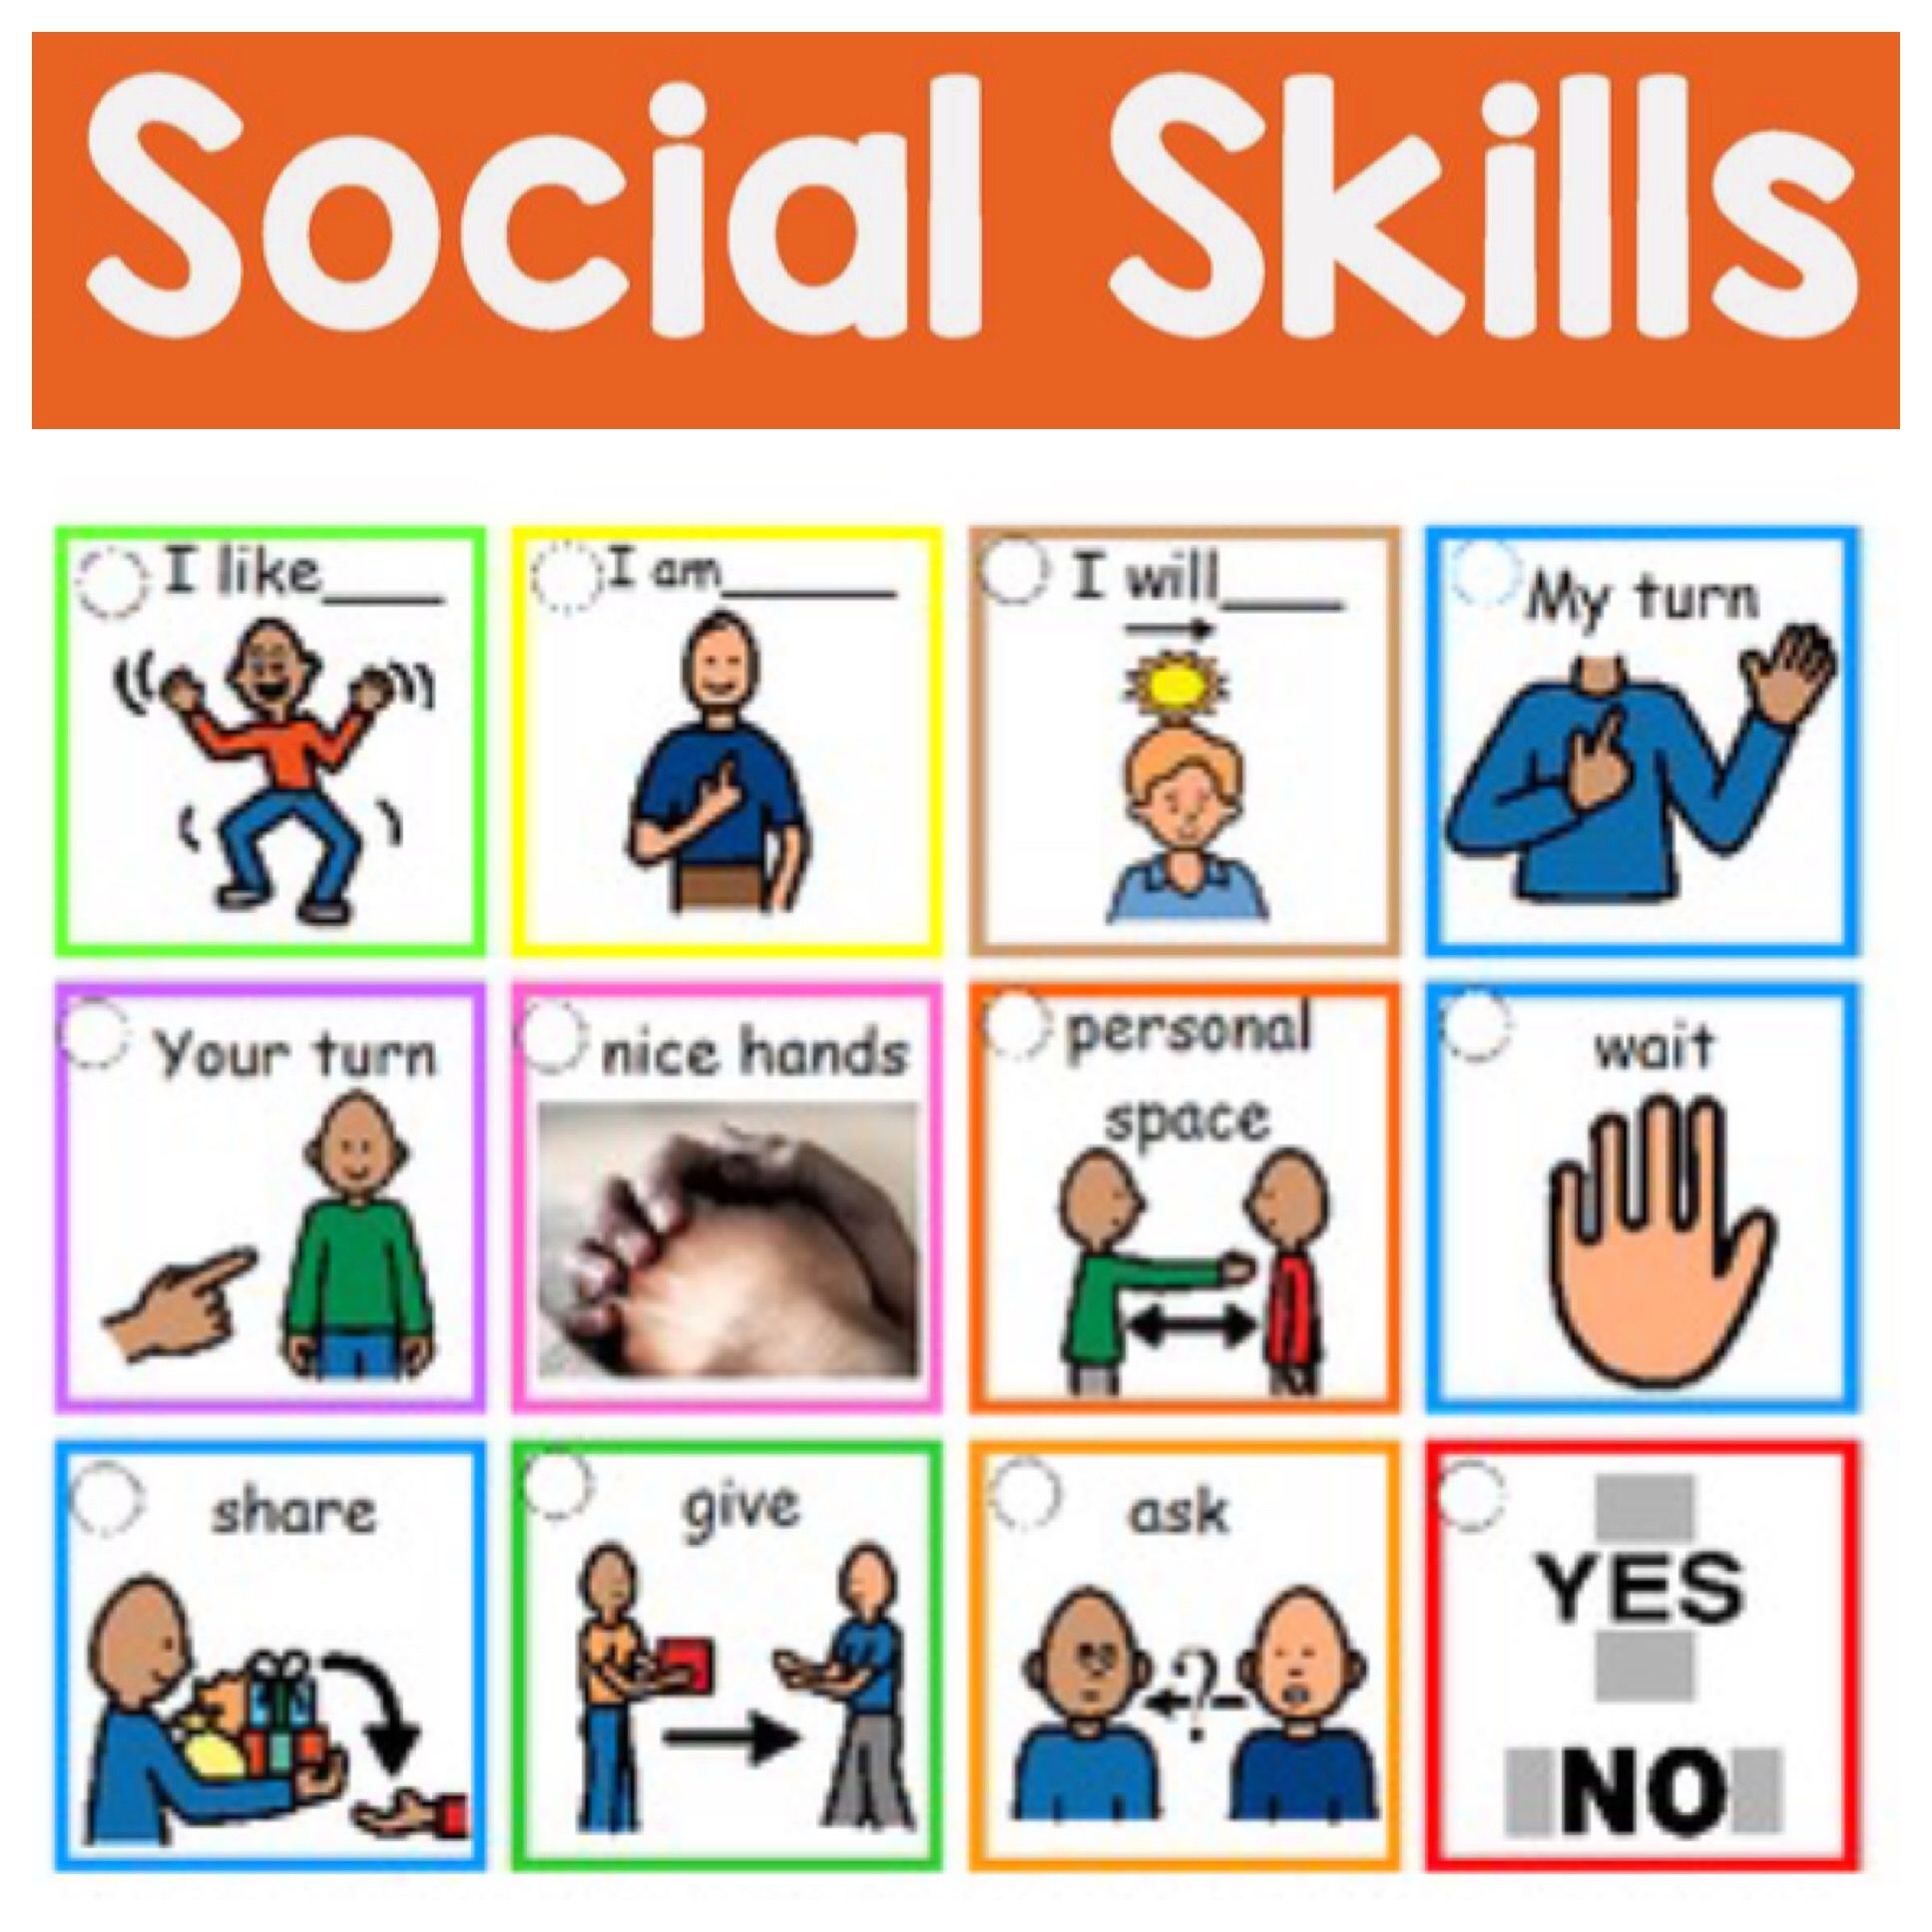 Helping your child develop social skills